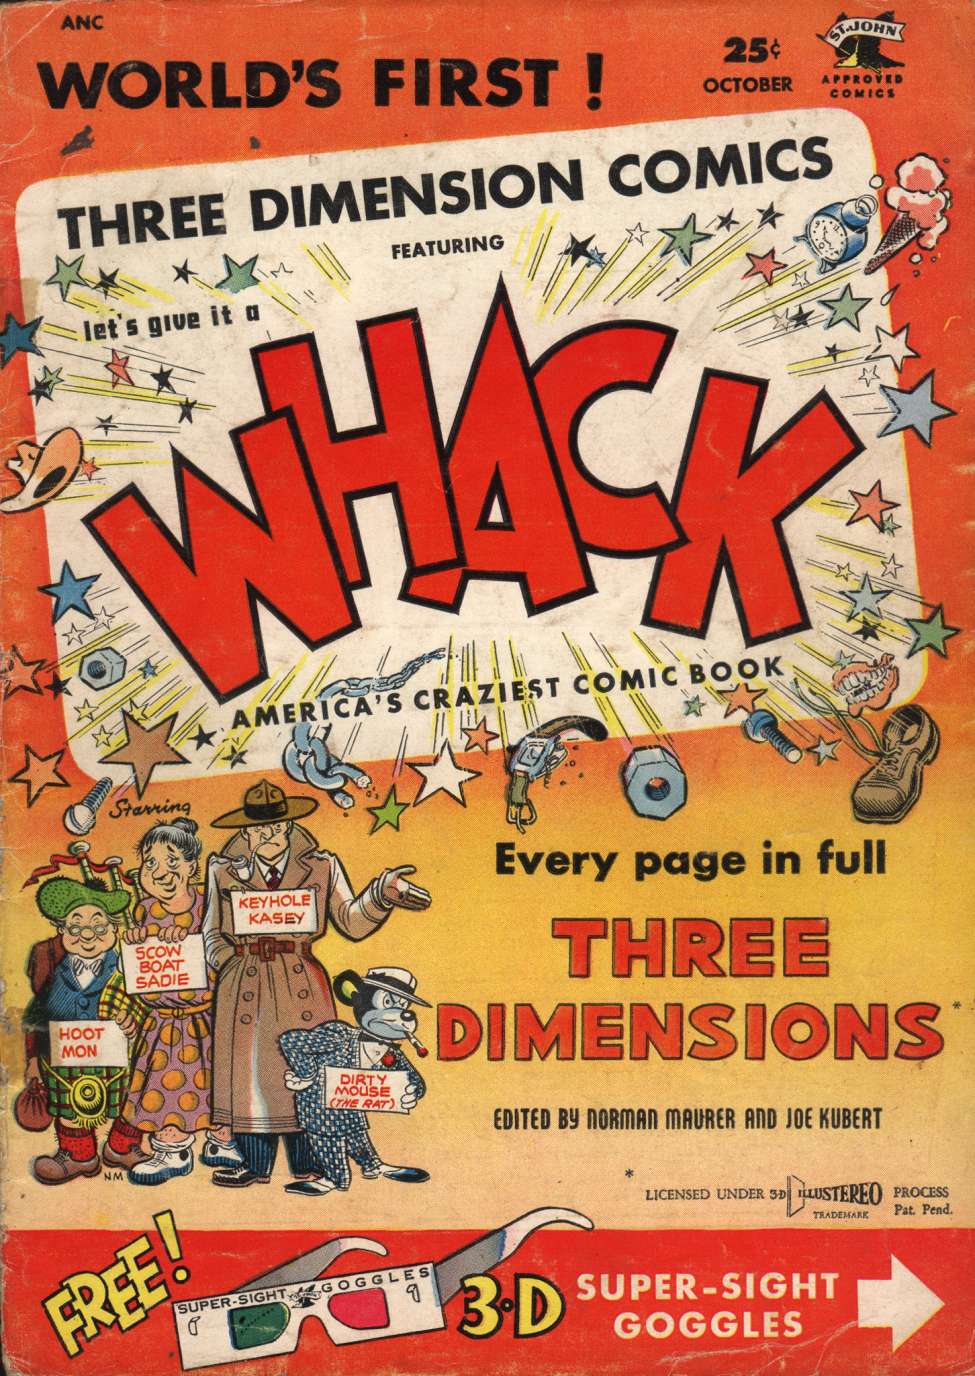 Comic Book Cover For Whack 1 (3D) - Version 1